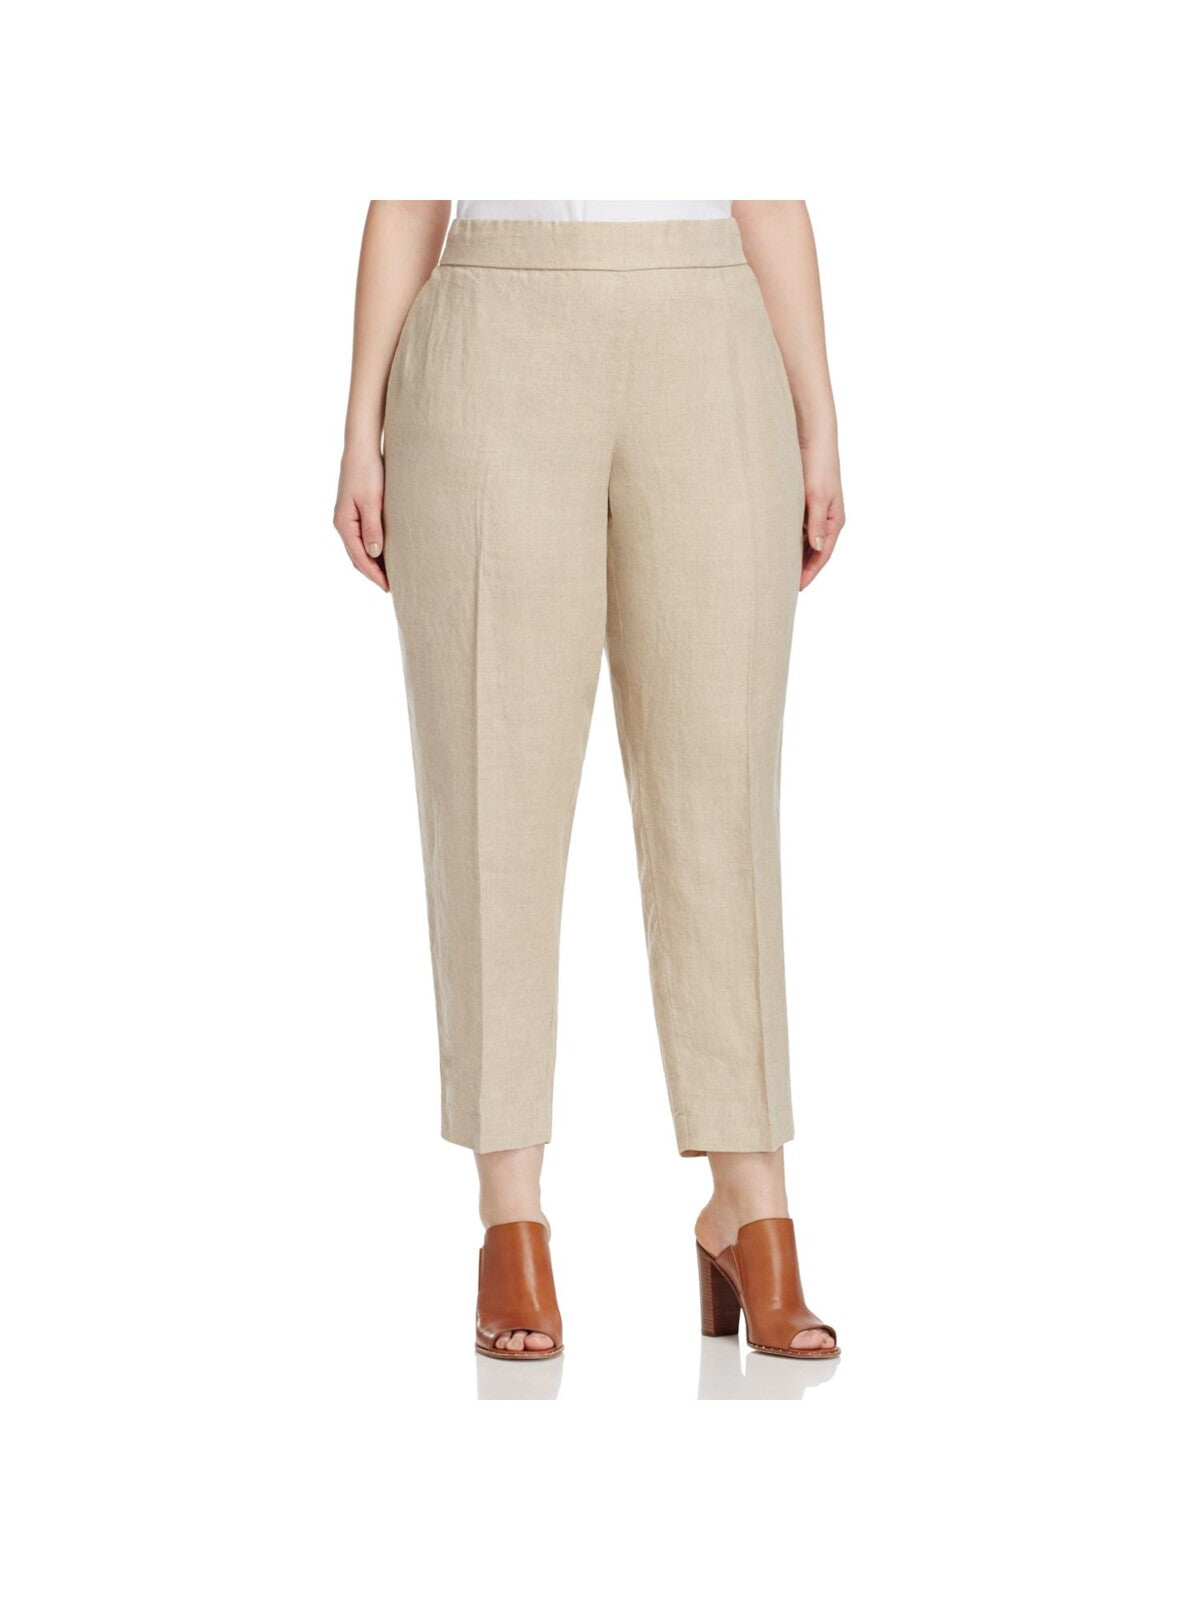 EILEEN FISHER Womens Beige Stretch Darted Tapered Ankle Pants Plus 1X